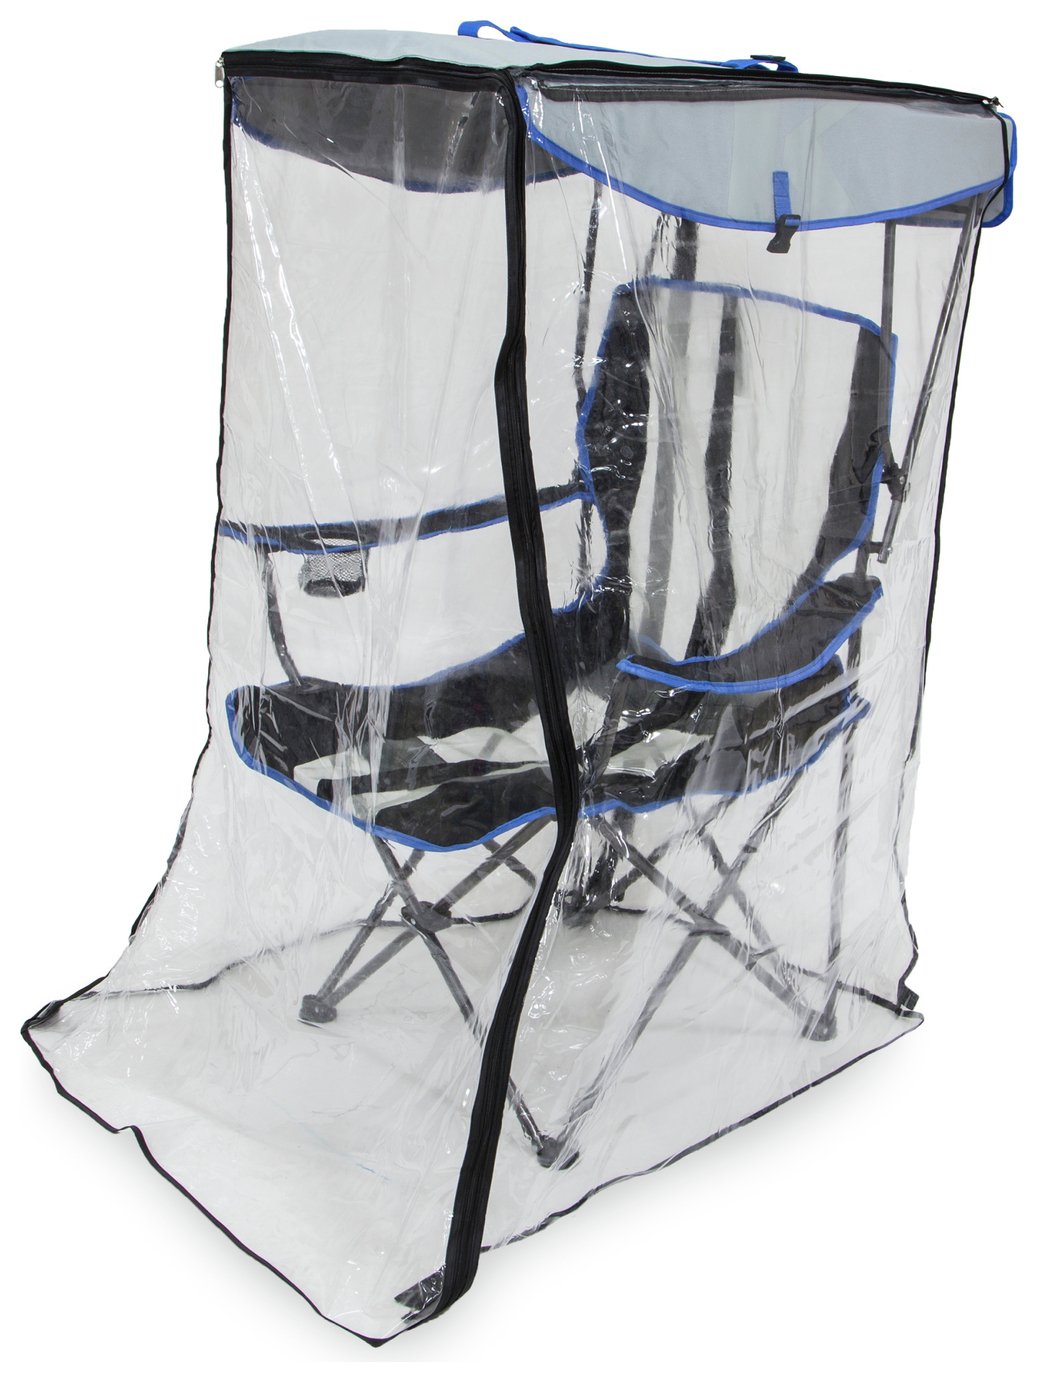 Kelsyus Camping Canopy Chair with Rain Cover Reviews